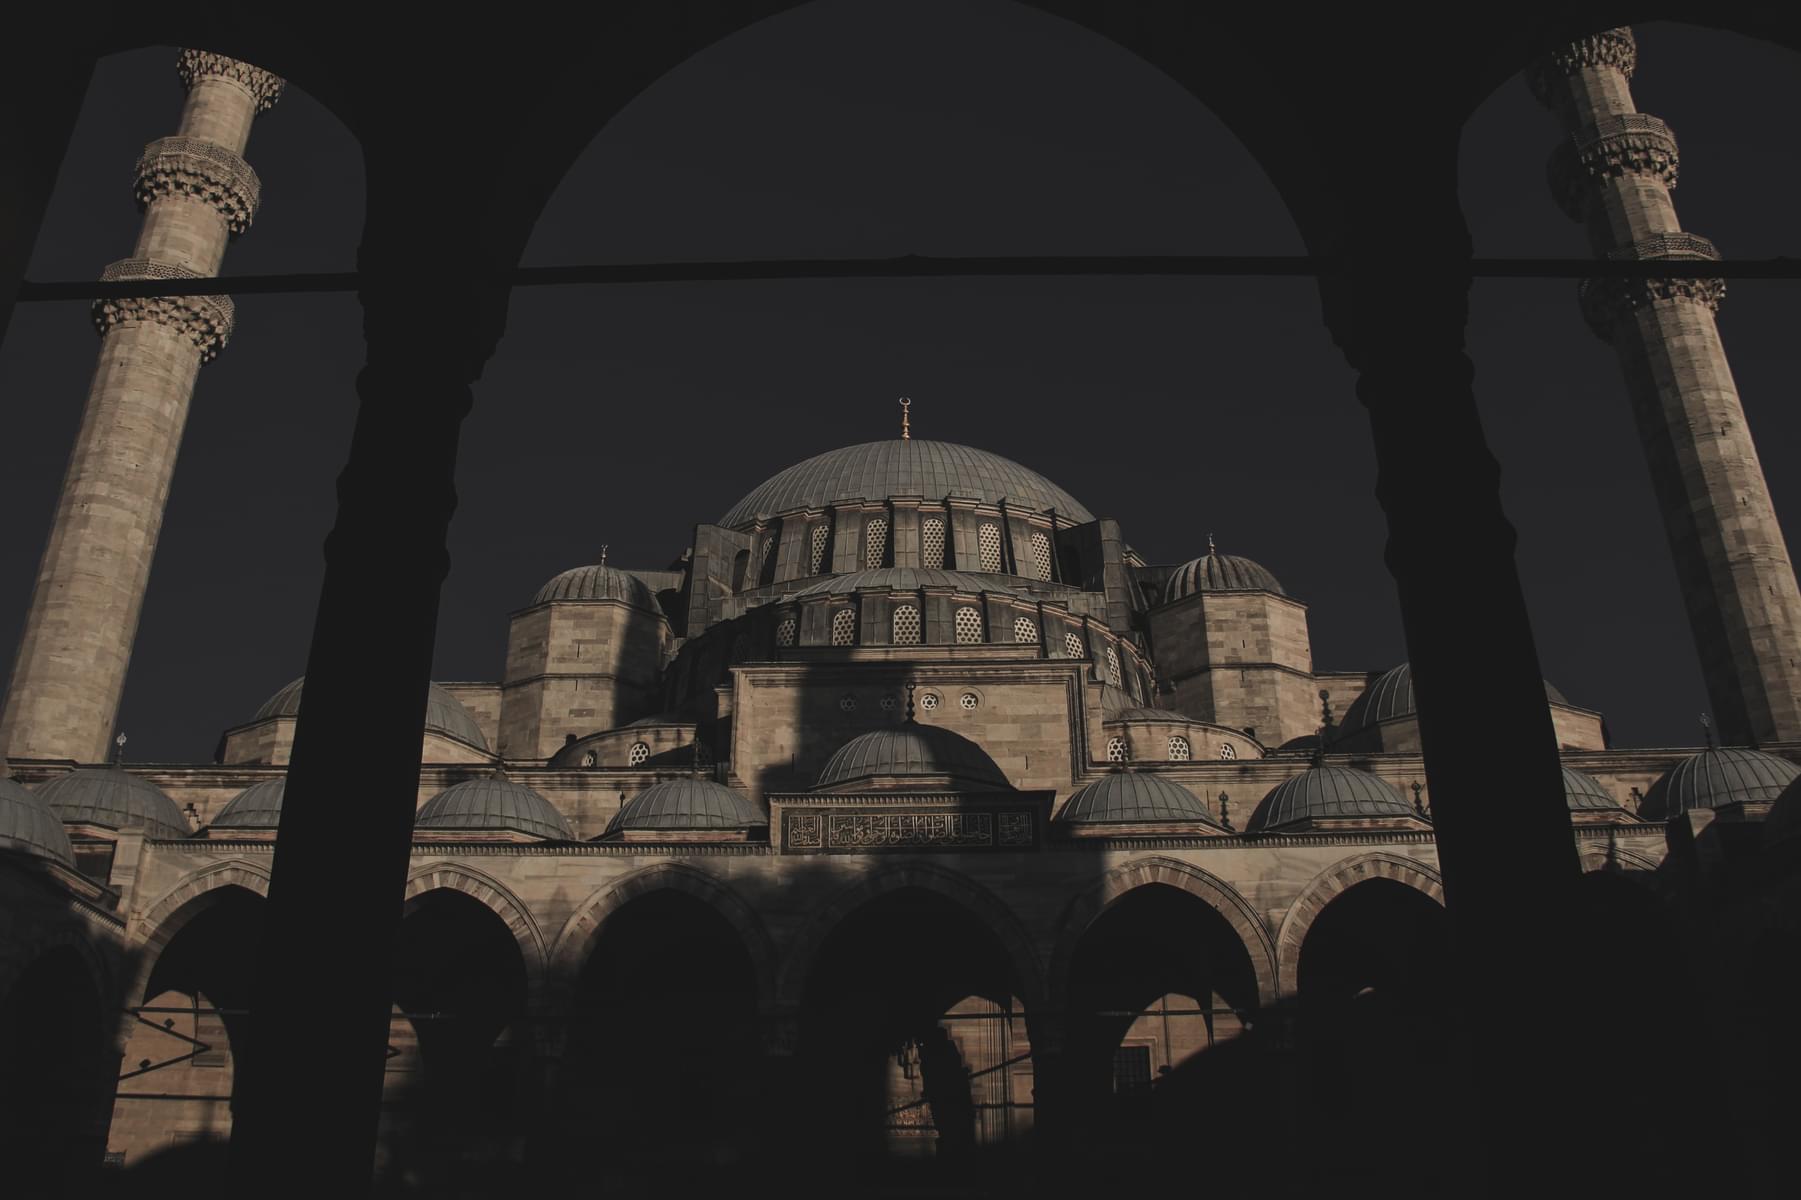 Admire the Architecture of the Süleymaniye Mosque